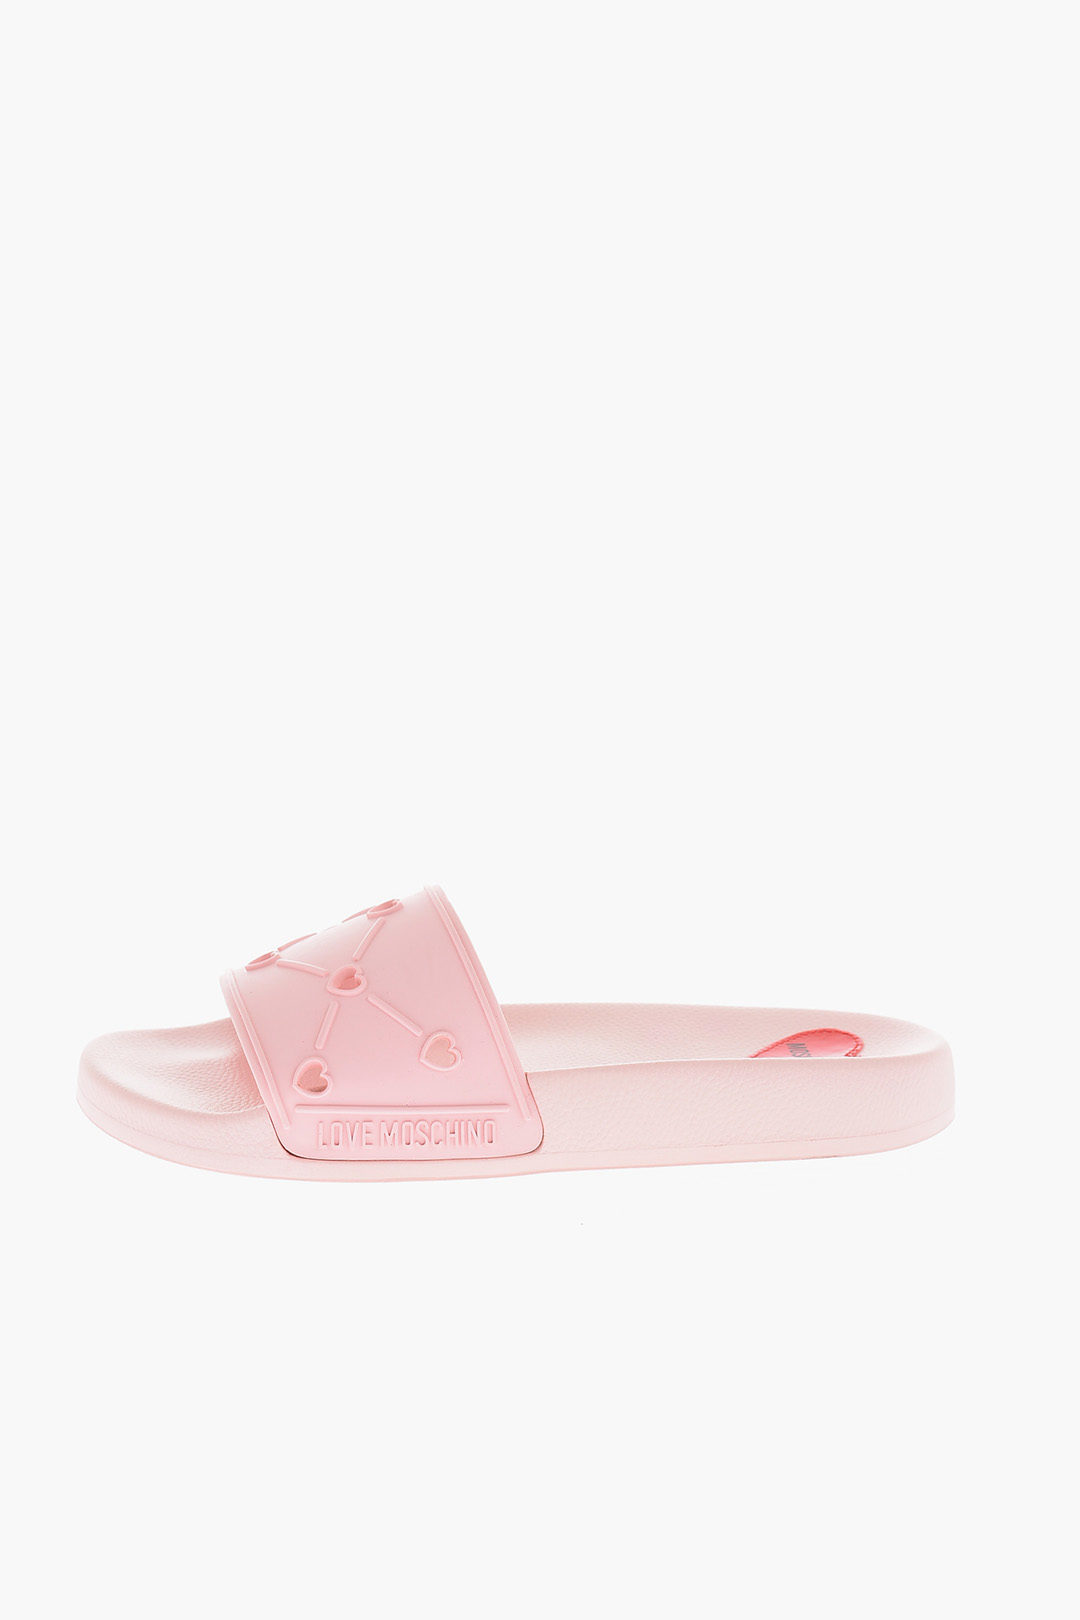 Moschino LOVE Cut-Out Details Solid Color Slides women - Glamood Outlet